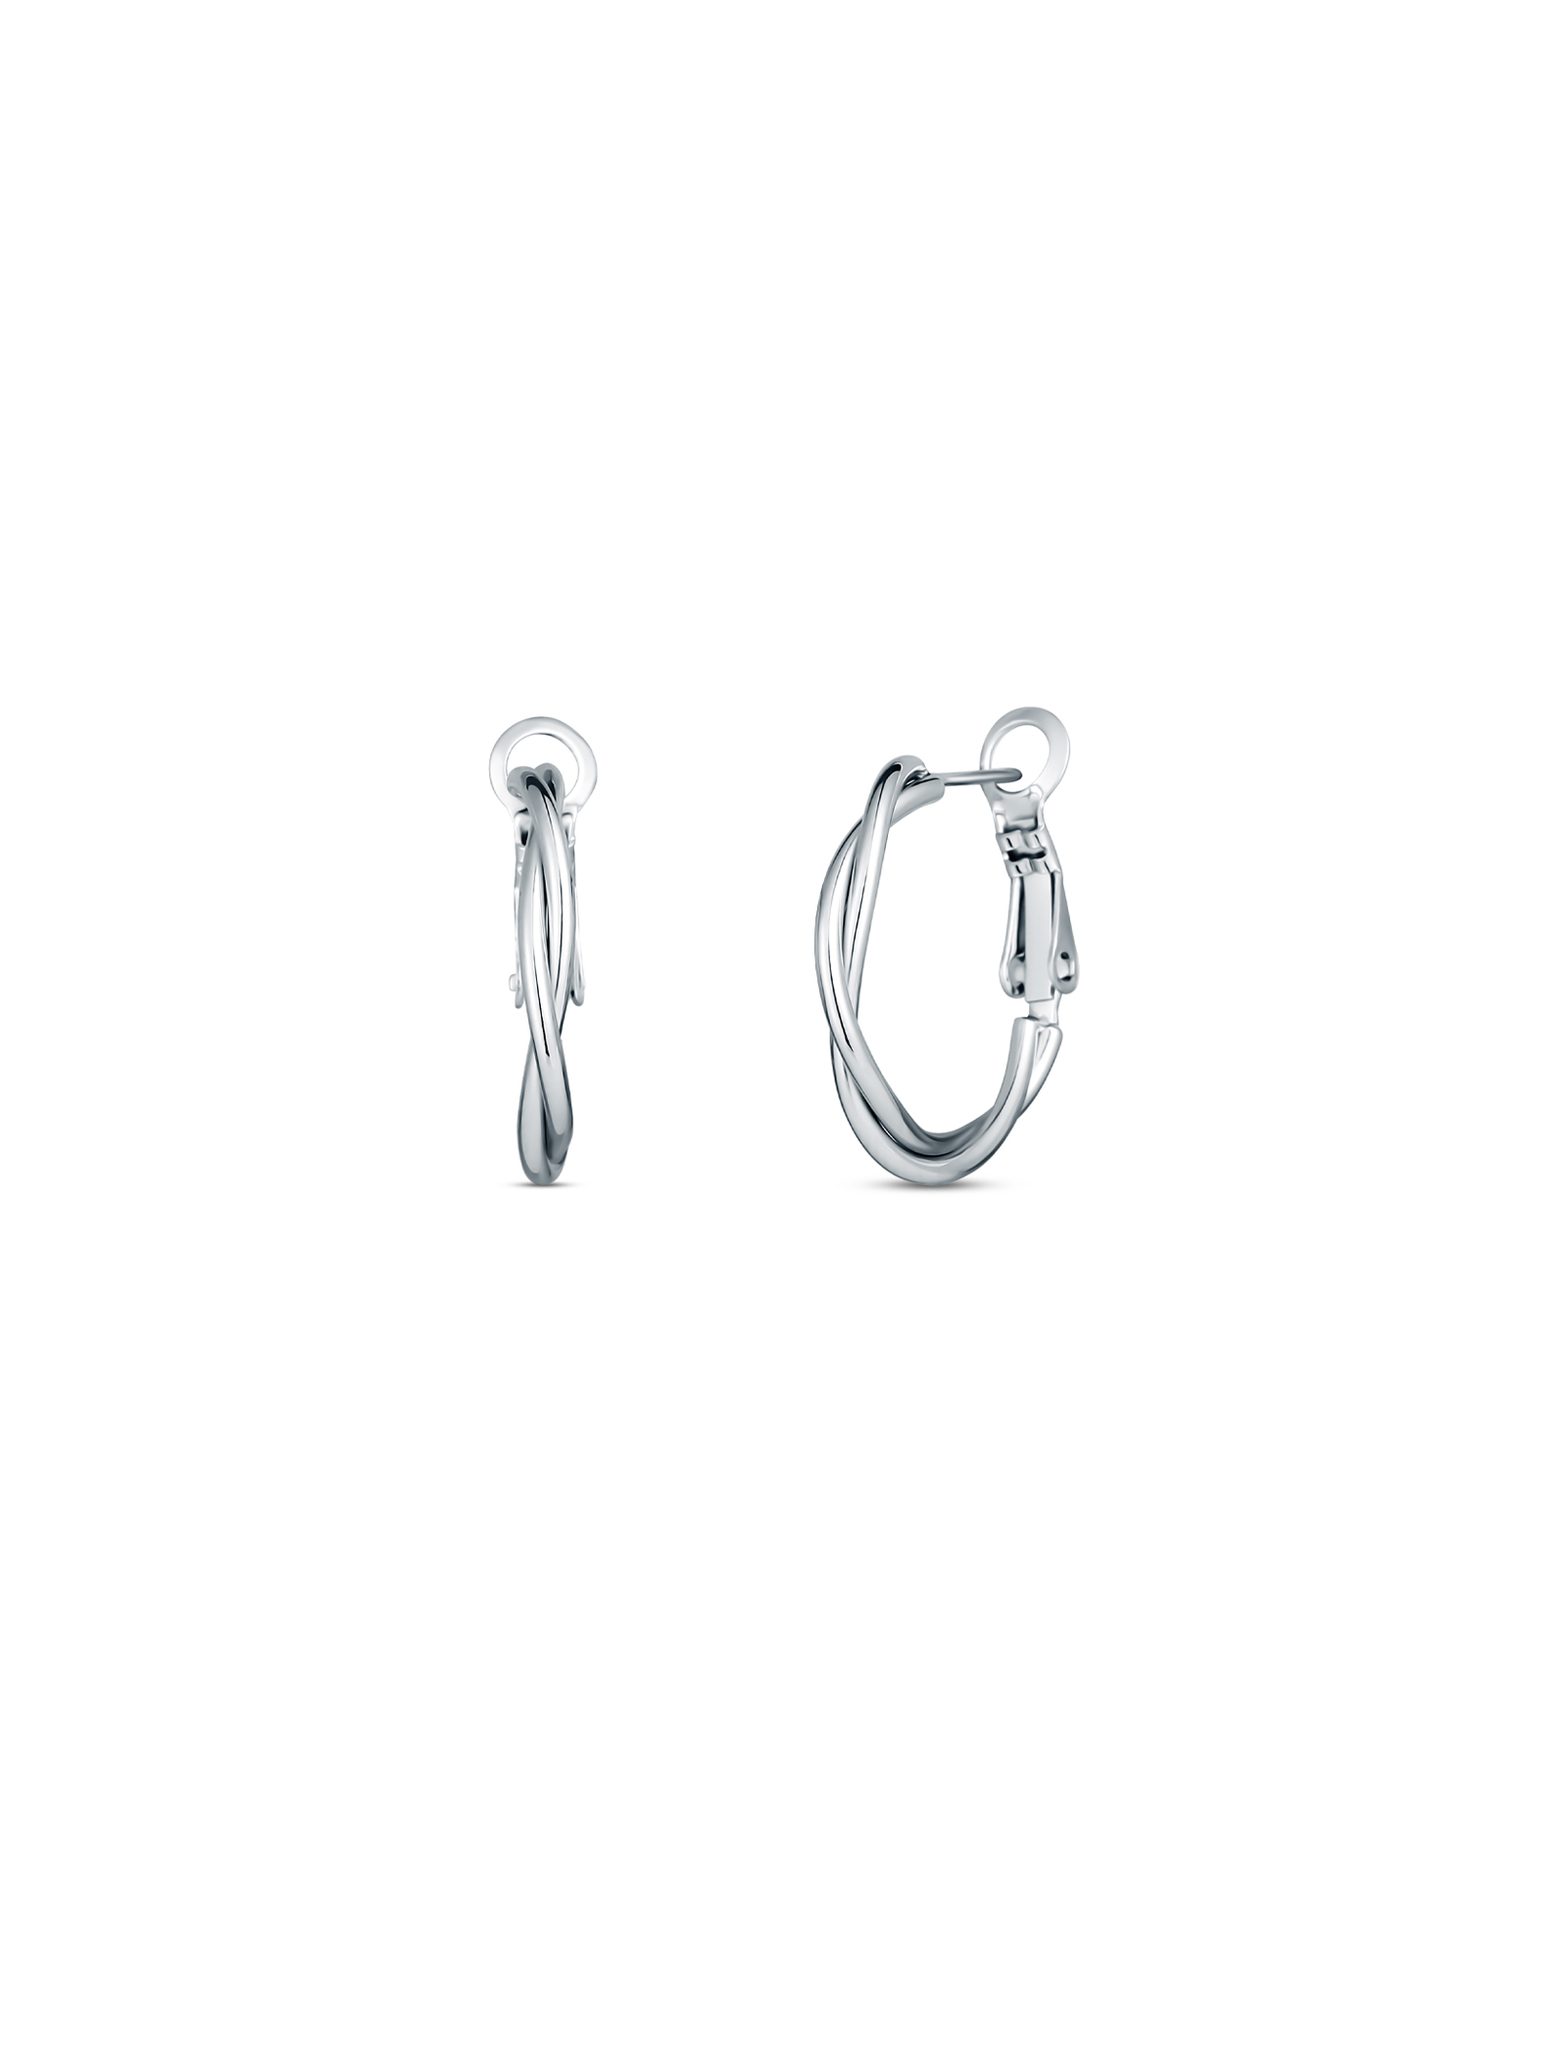 VUCH Aster Silver Earrings